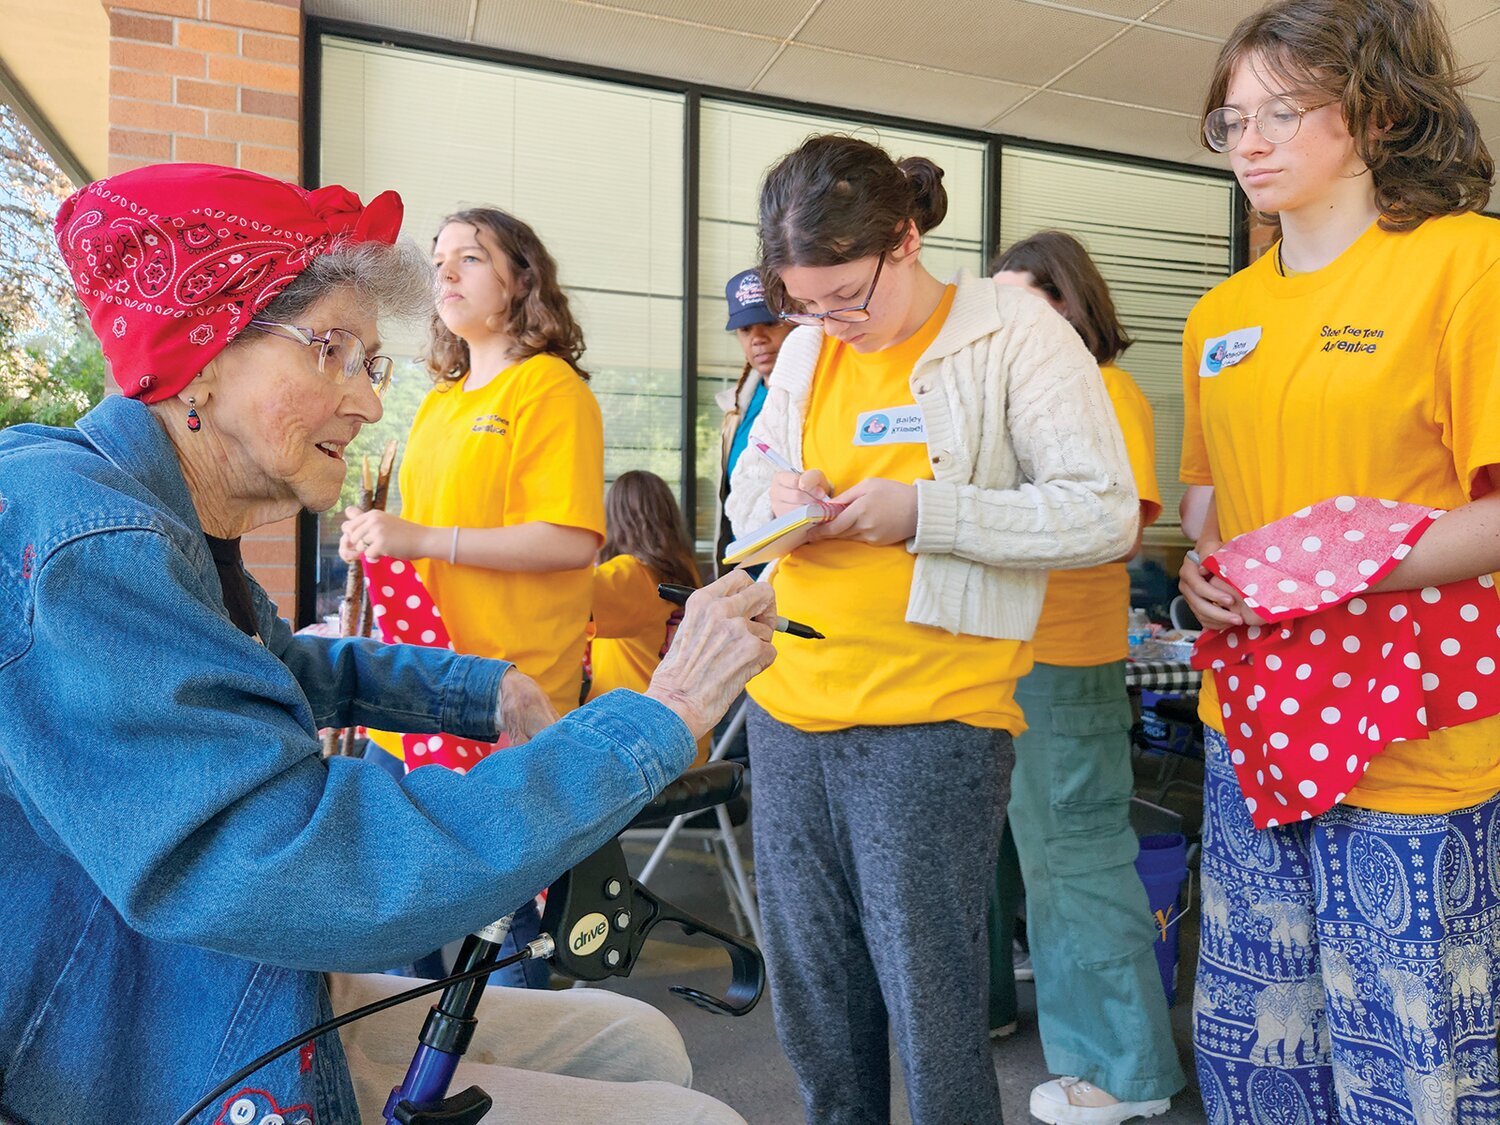 Doris Bier, Lewis County’s last surviving Rosie the Riveter, signs items for girls at the first-ever Steel Toe Teens camp in this photo provided by Julie McDonald.